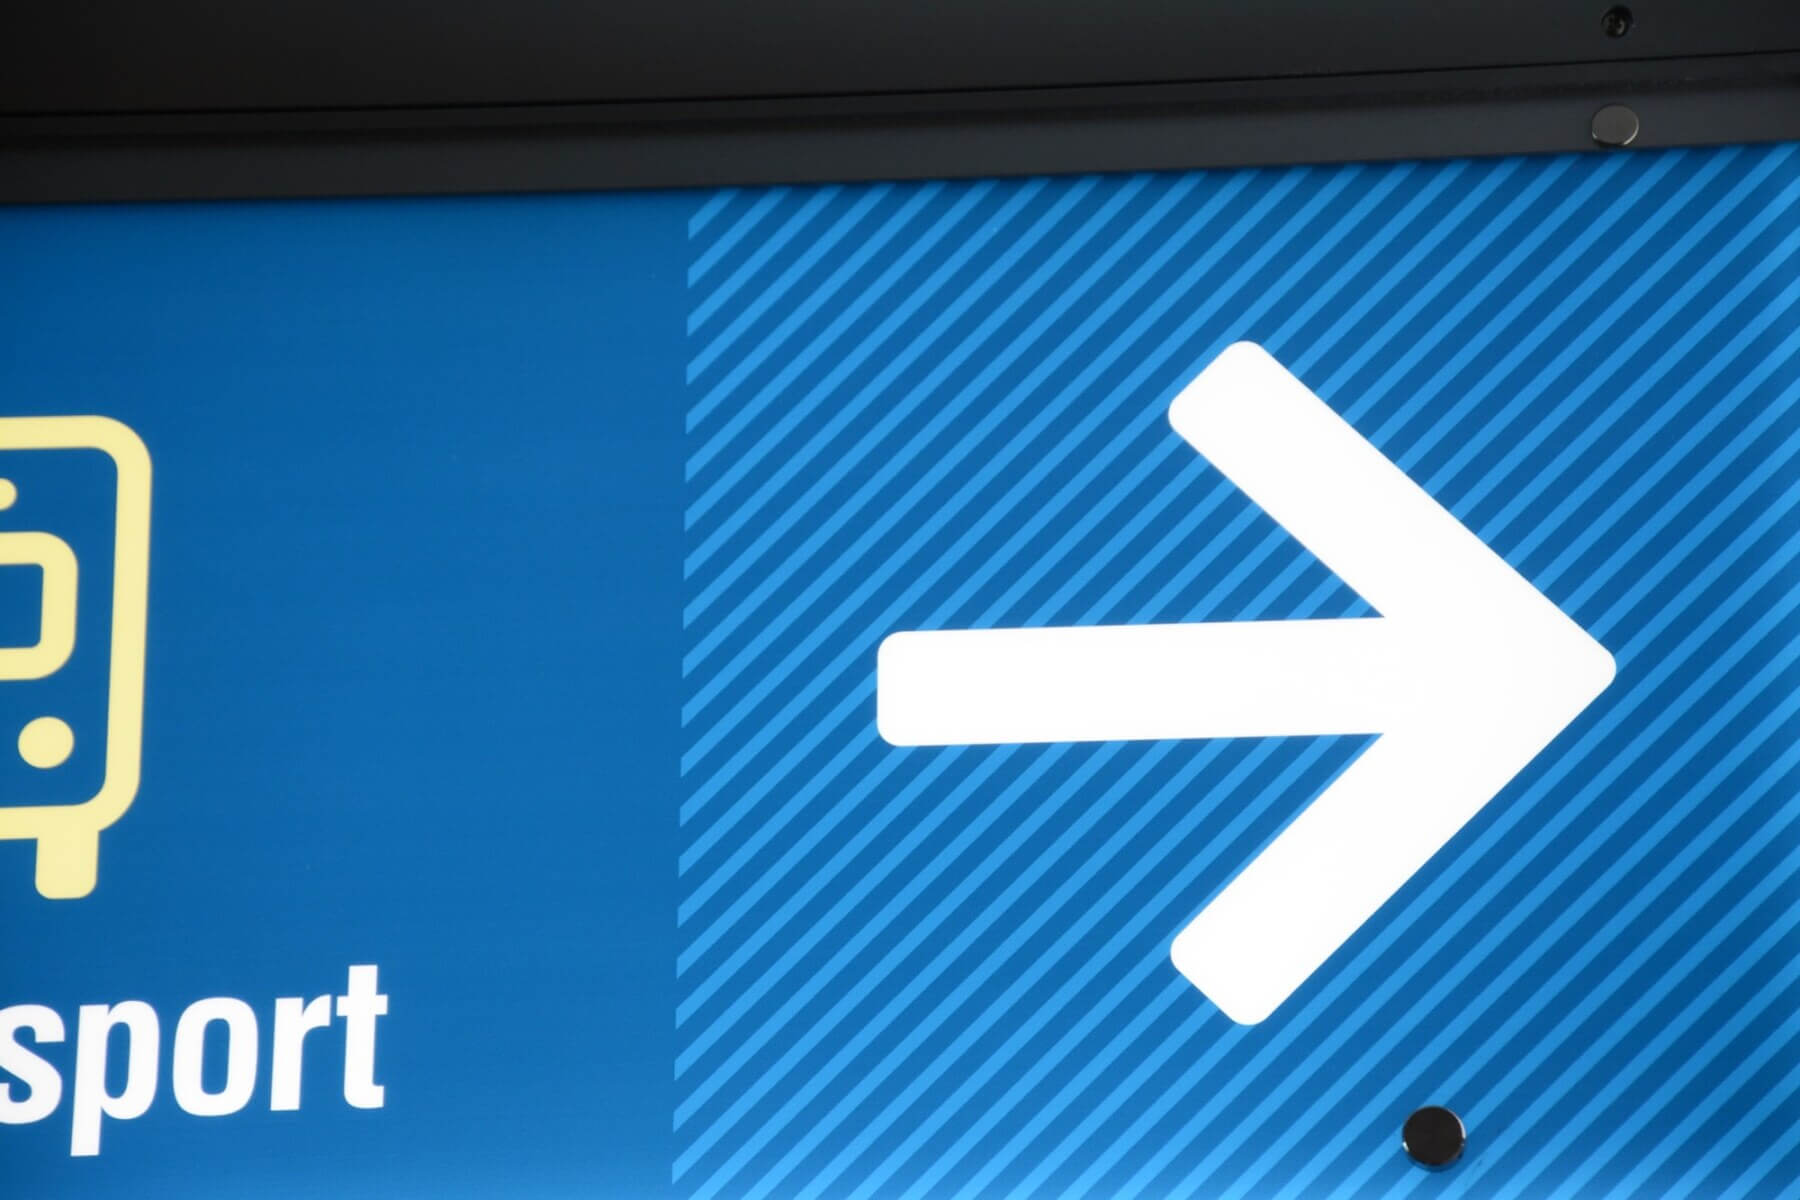 a close up view of the blue stripe pattern on wayfinding signage at Charlotte Douglas International Airport